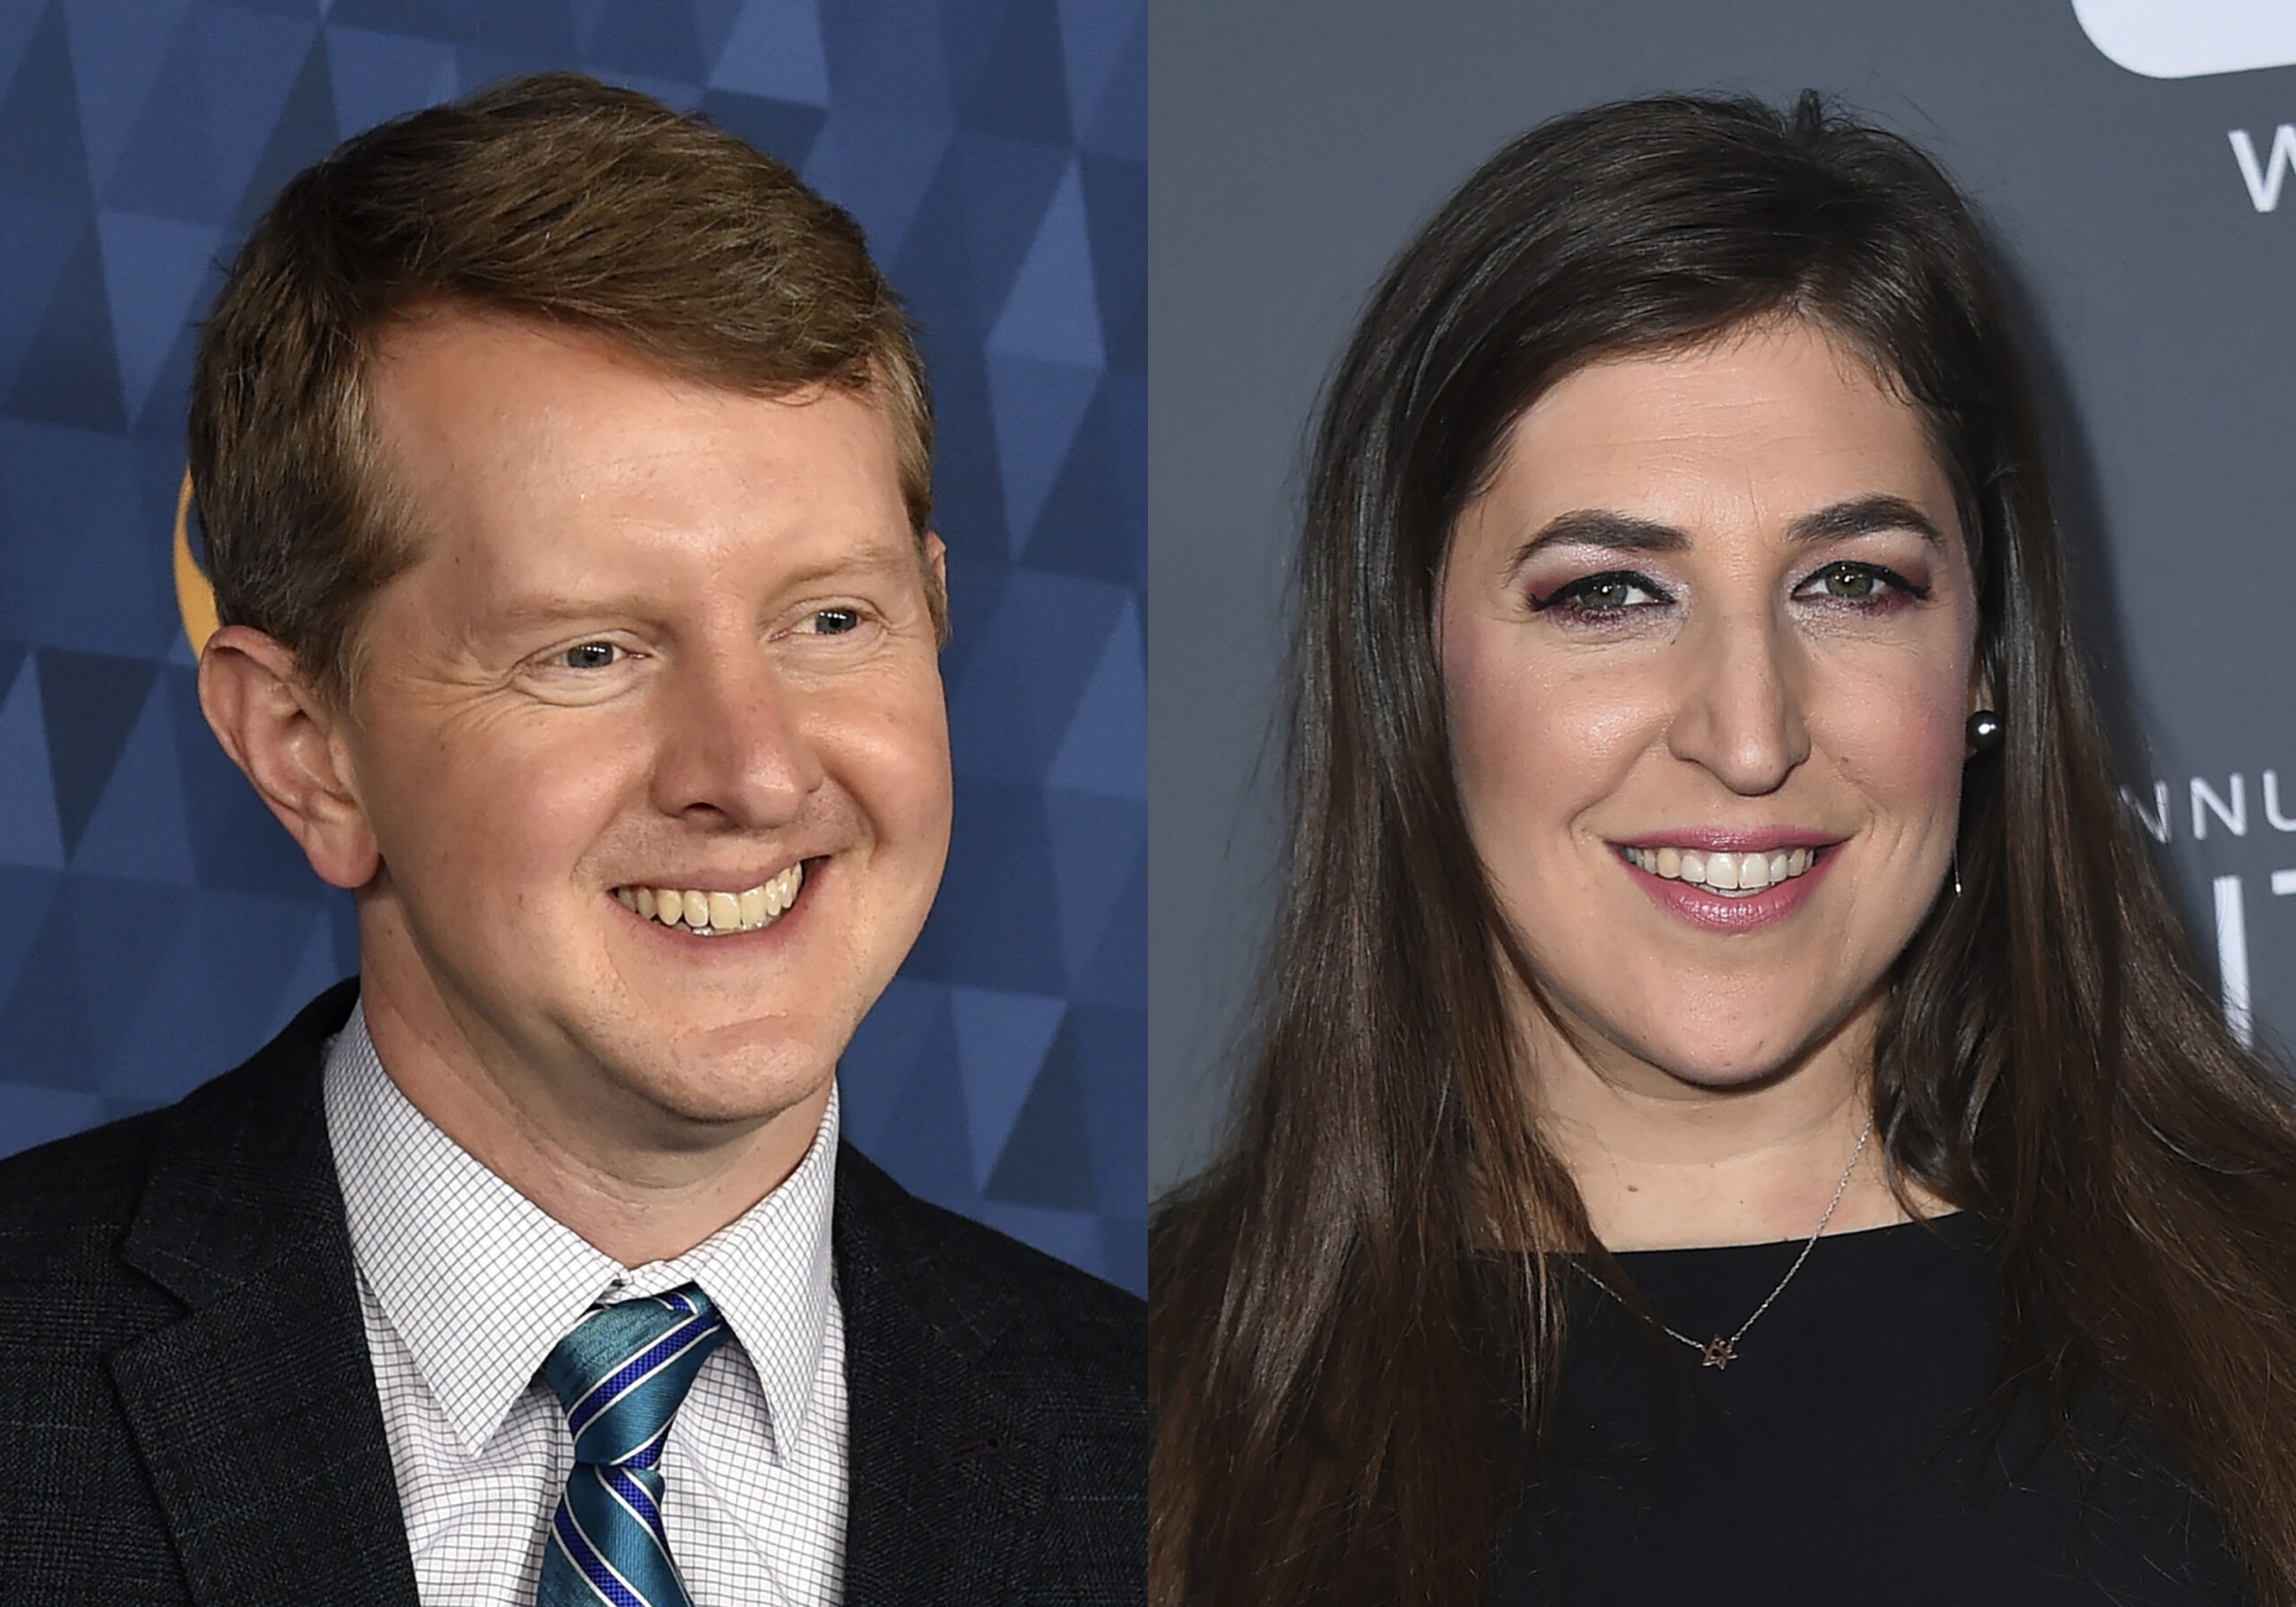 Ken Jennings appears at the 2020 ABC Television Critics Association Winter Press Tour in Pasadena, Calif., on Jan. 8, 2020, left, and actress Mayim Bialik appears at the 23rd annual Critics' Choice Awards in Santa Monica, Calif., on Jan. 11, 2018. Jennings and Bialik will split “Jeopardy!” hosting duties for the remainder of the game show’s 38th season. (AP Photo)